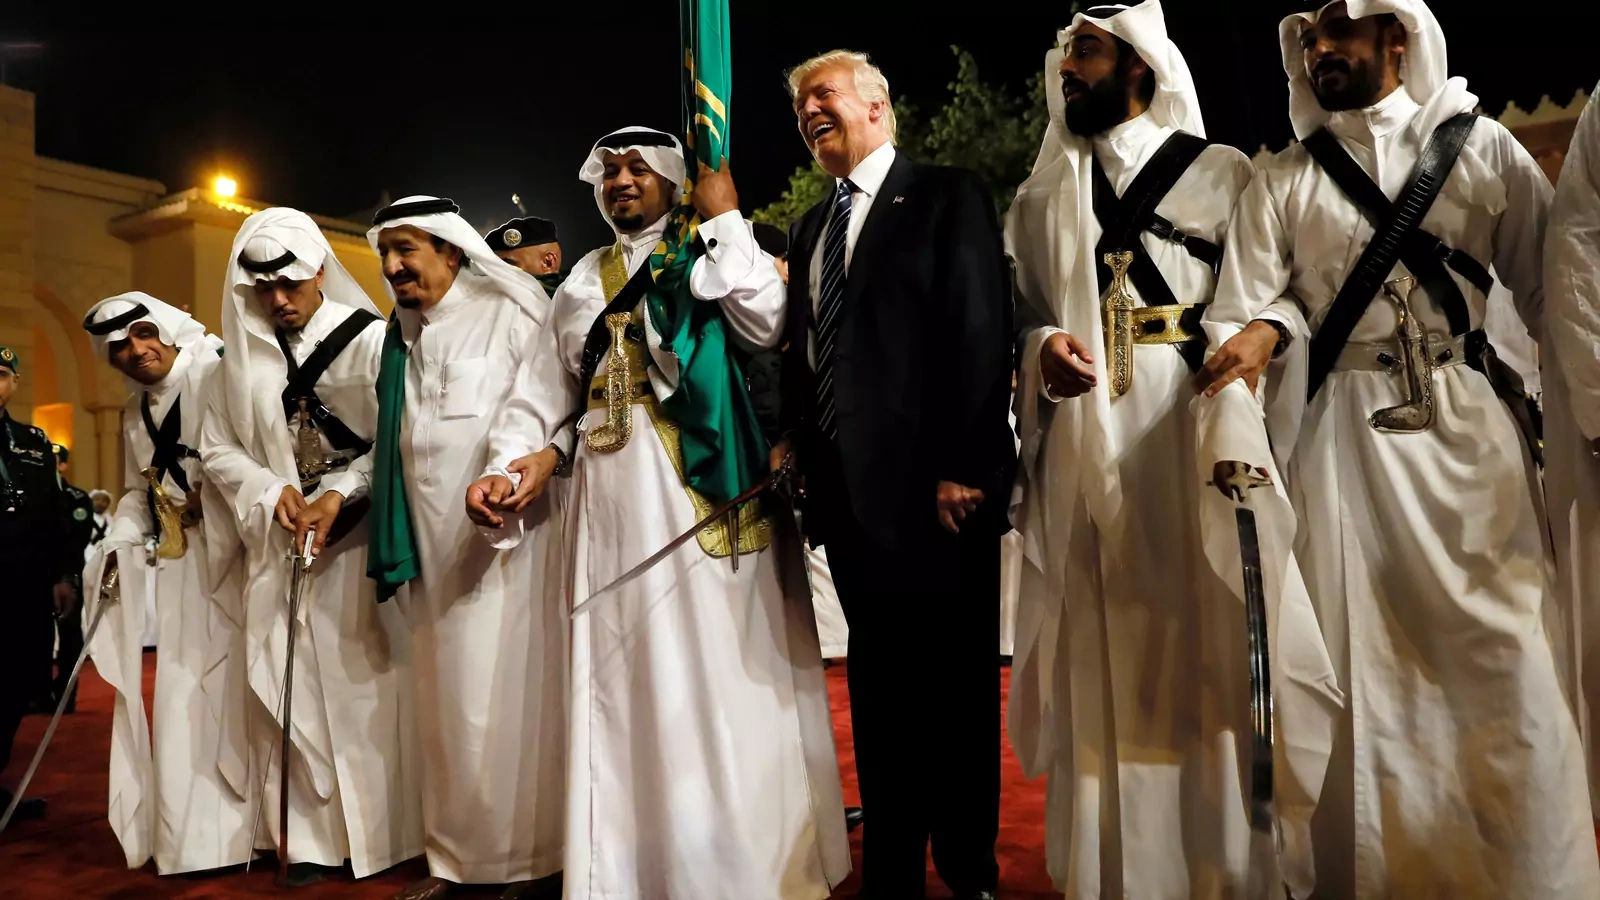 U.S. President Donald Trump dances with a sword as he arrives to a welcome ceremony at Al Murabba Palace in Riyadh, Saudi Arabia May 20, 2017.